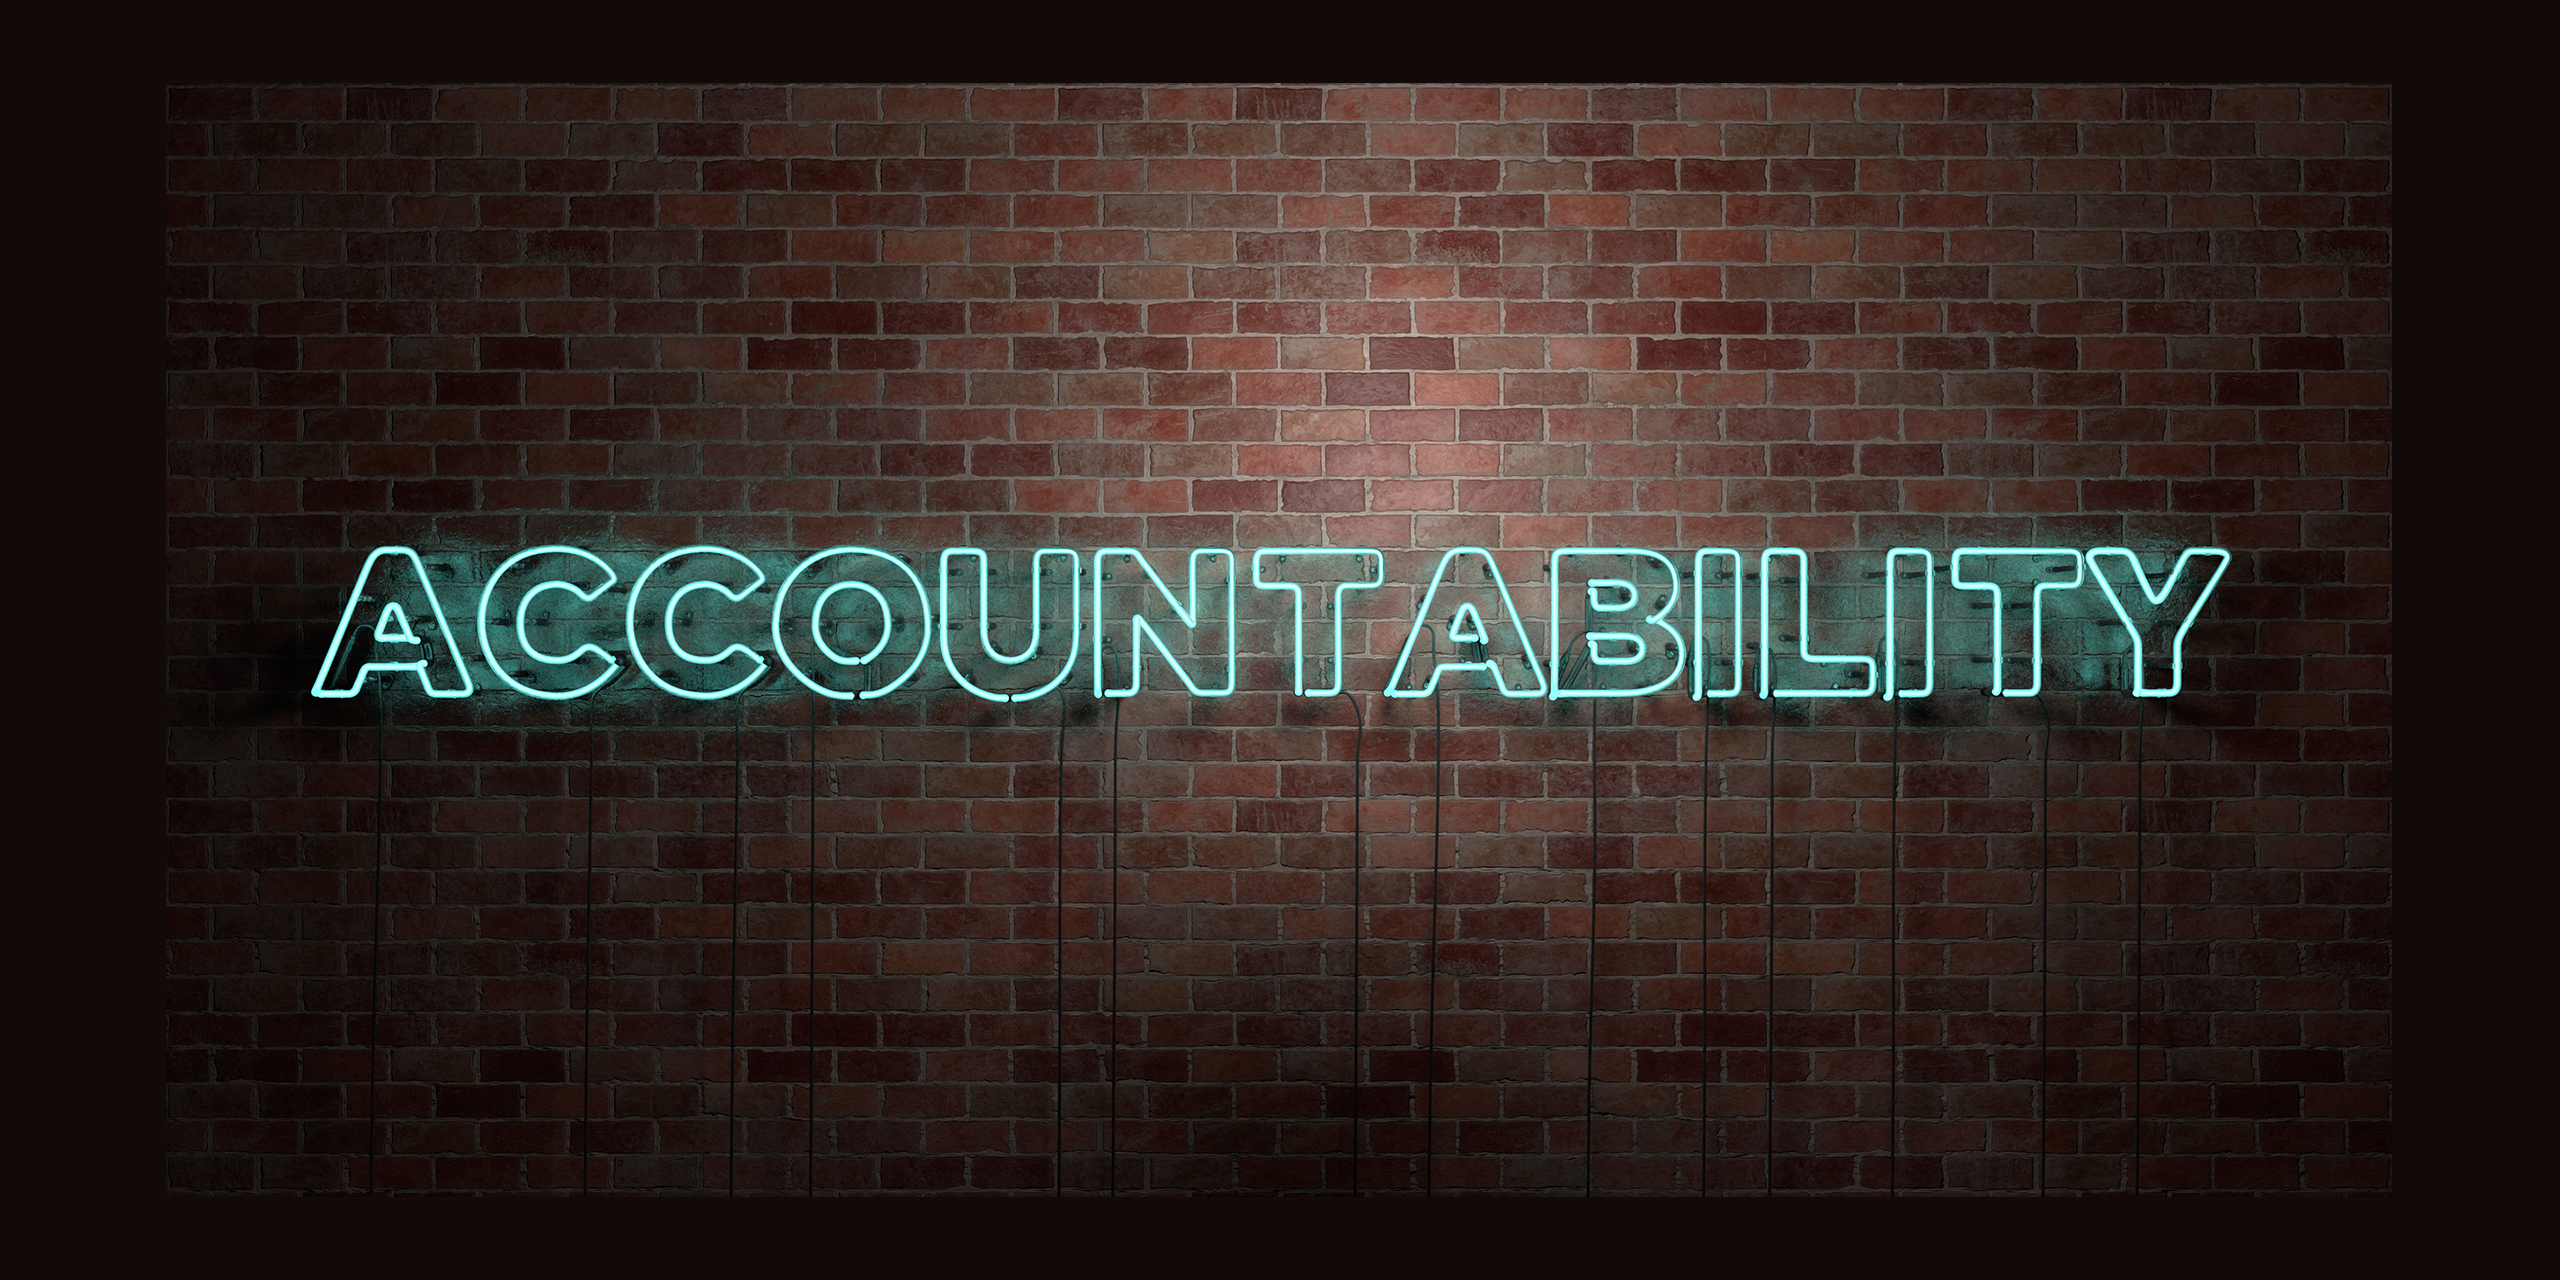 Holding Your Team Accountable